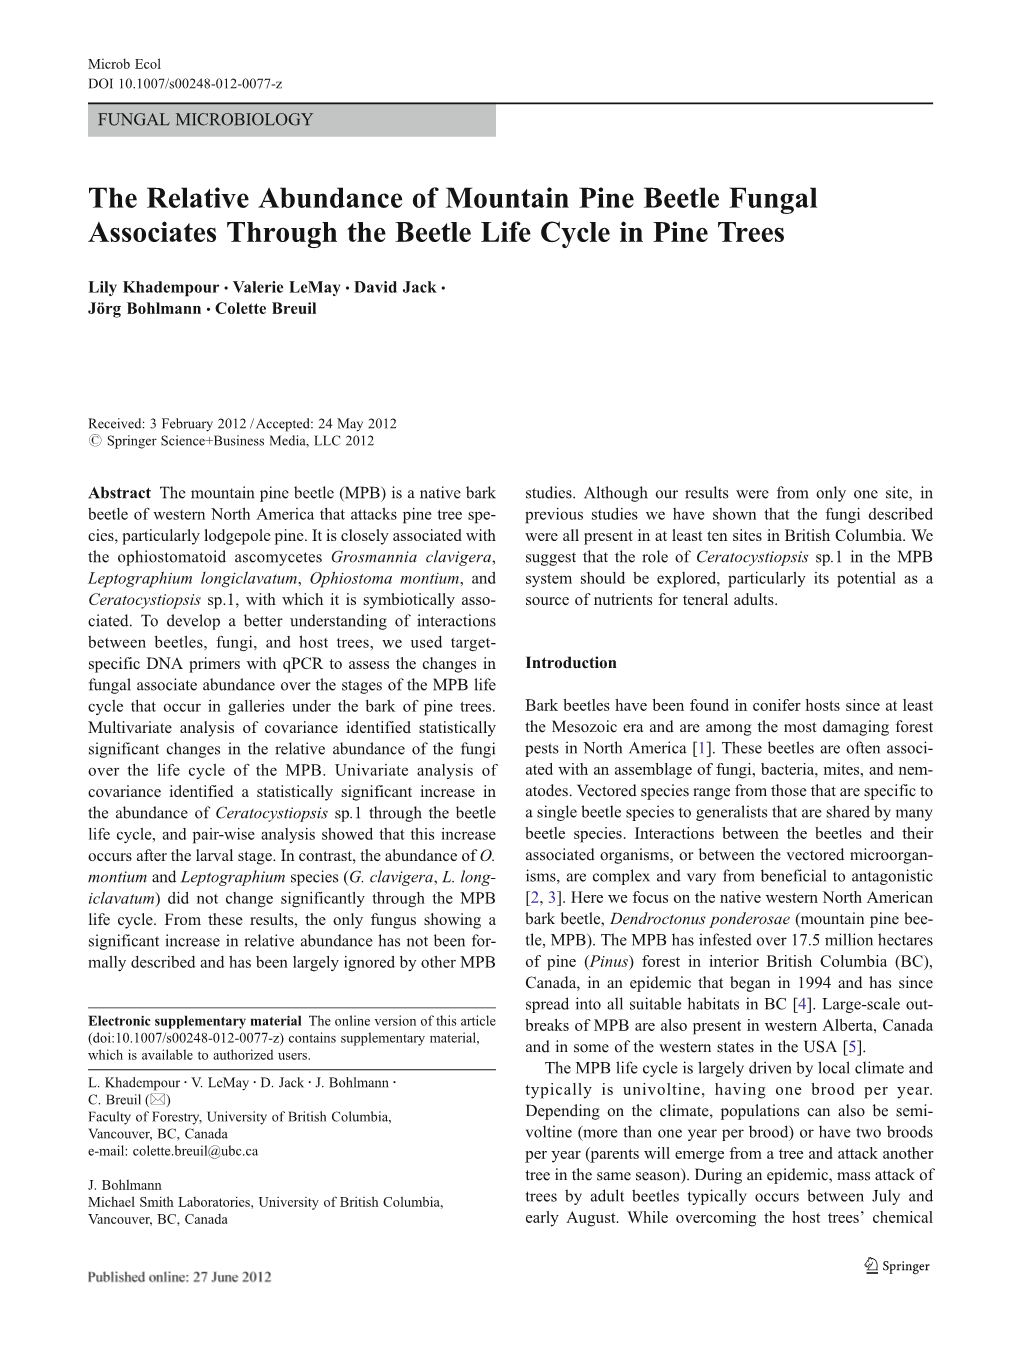 The Relative Abundance of Mountain Pine Beetle Fungal Associates Through the Beetle Life Cycle in Pine Trees